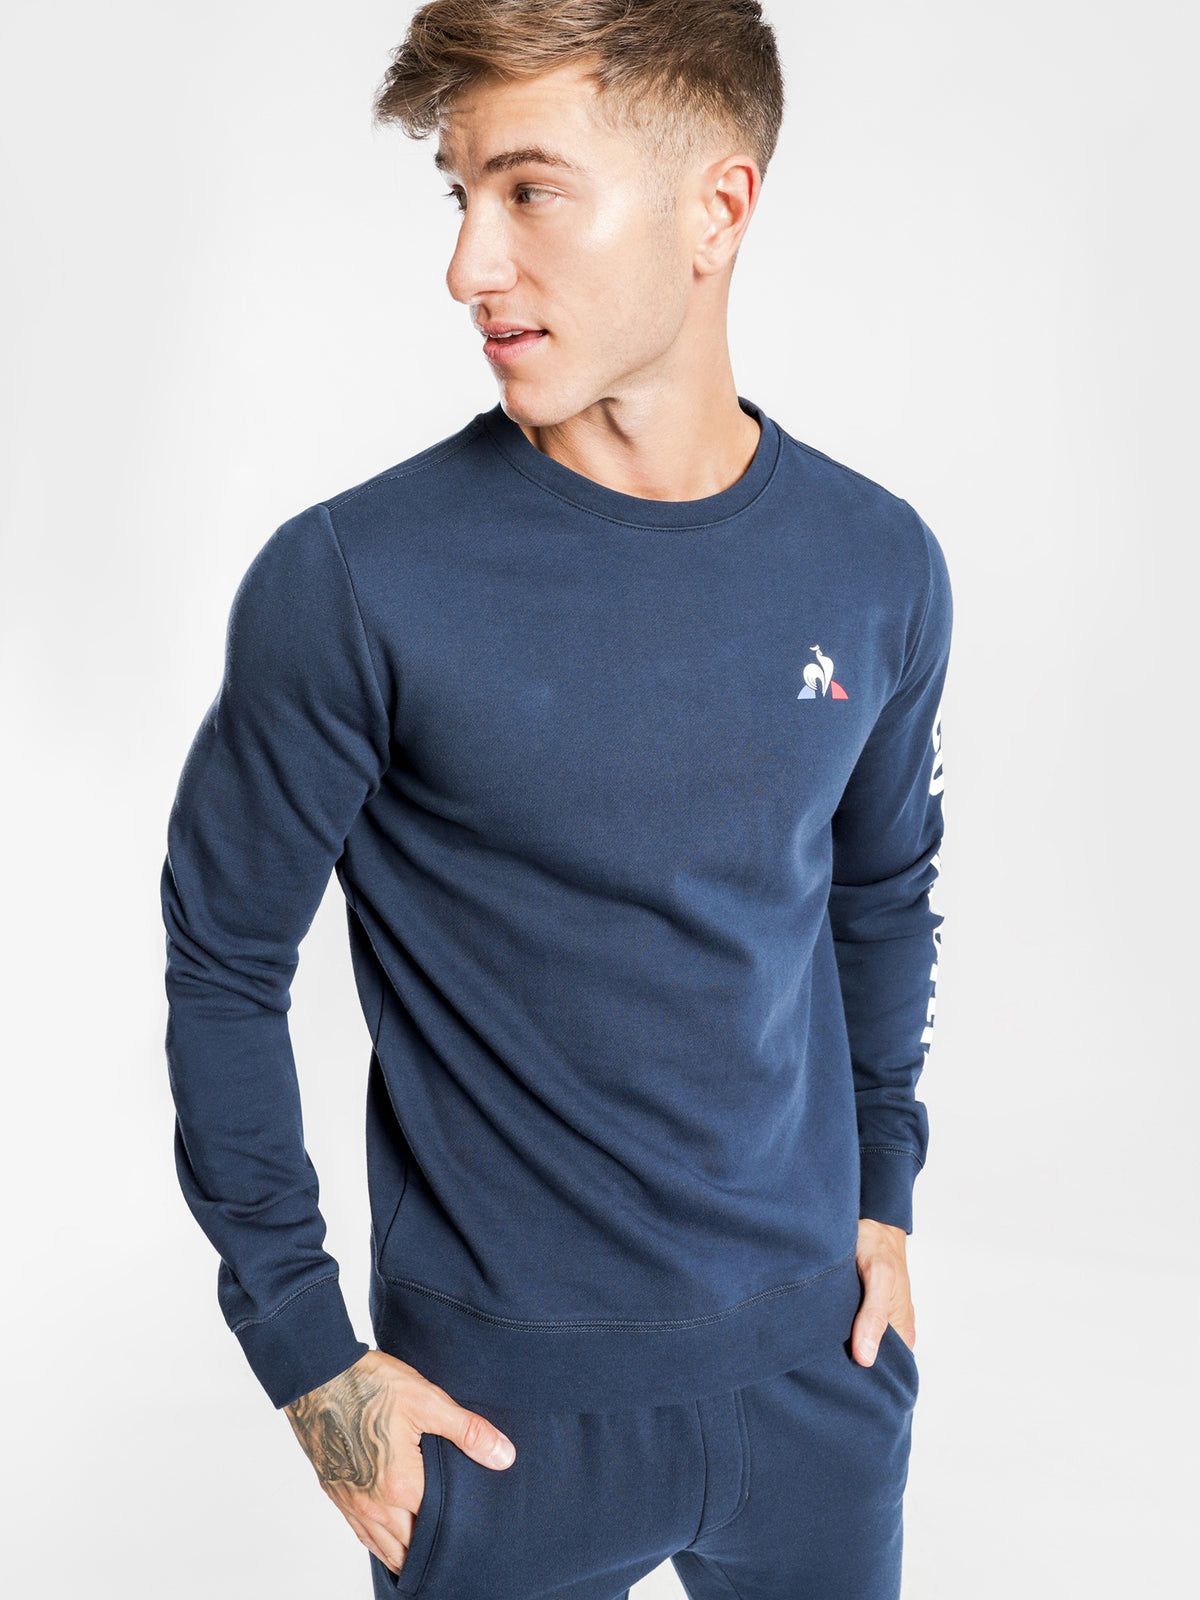 Pierre Pullover Sweater in Navy Blue